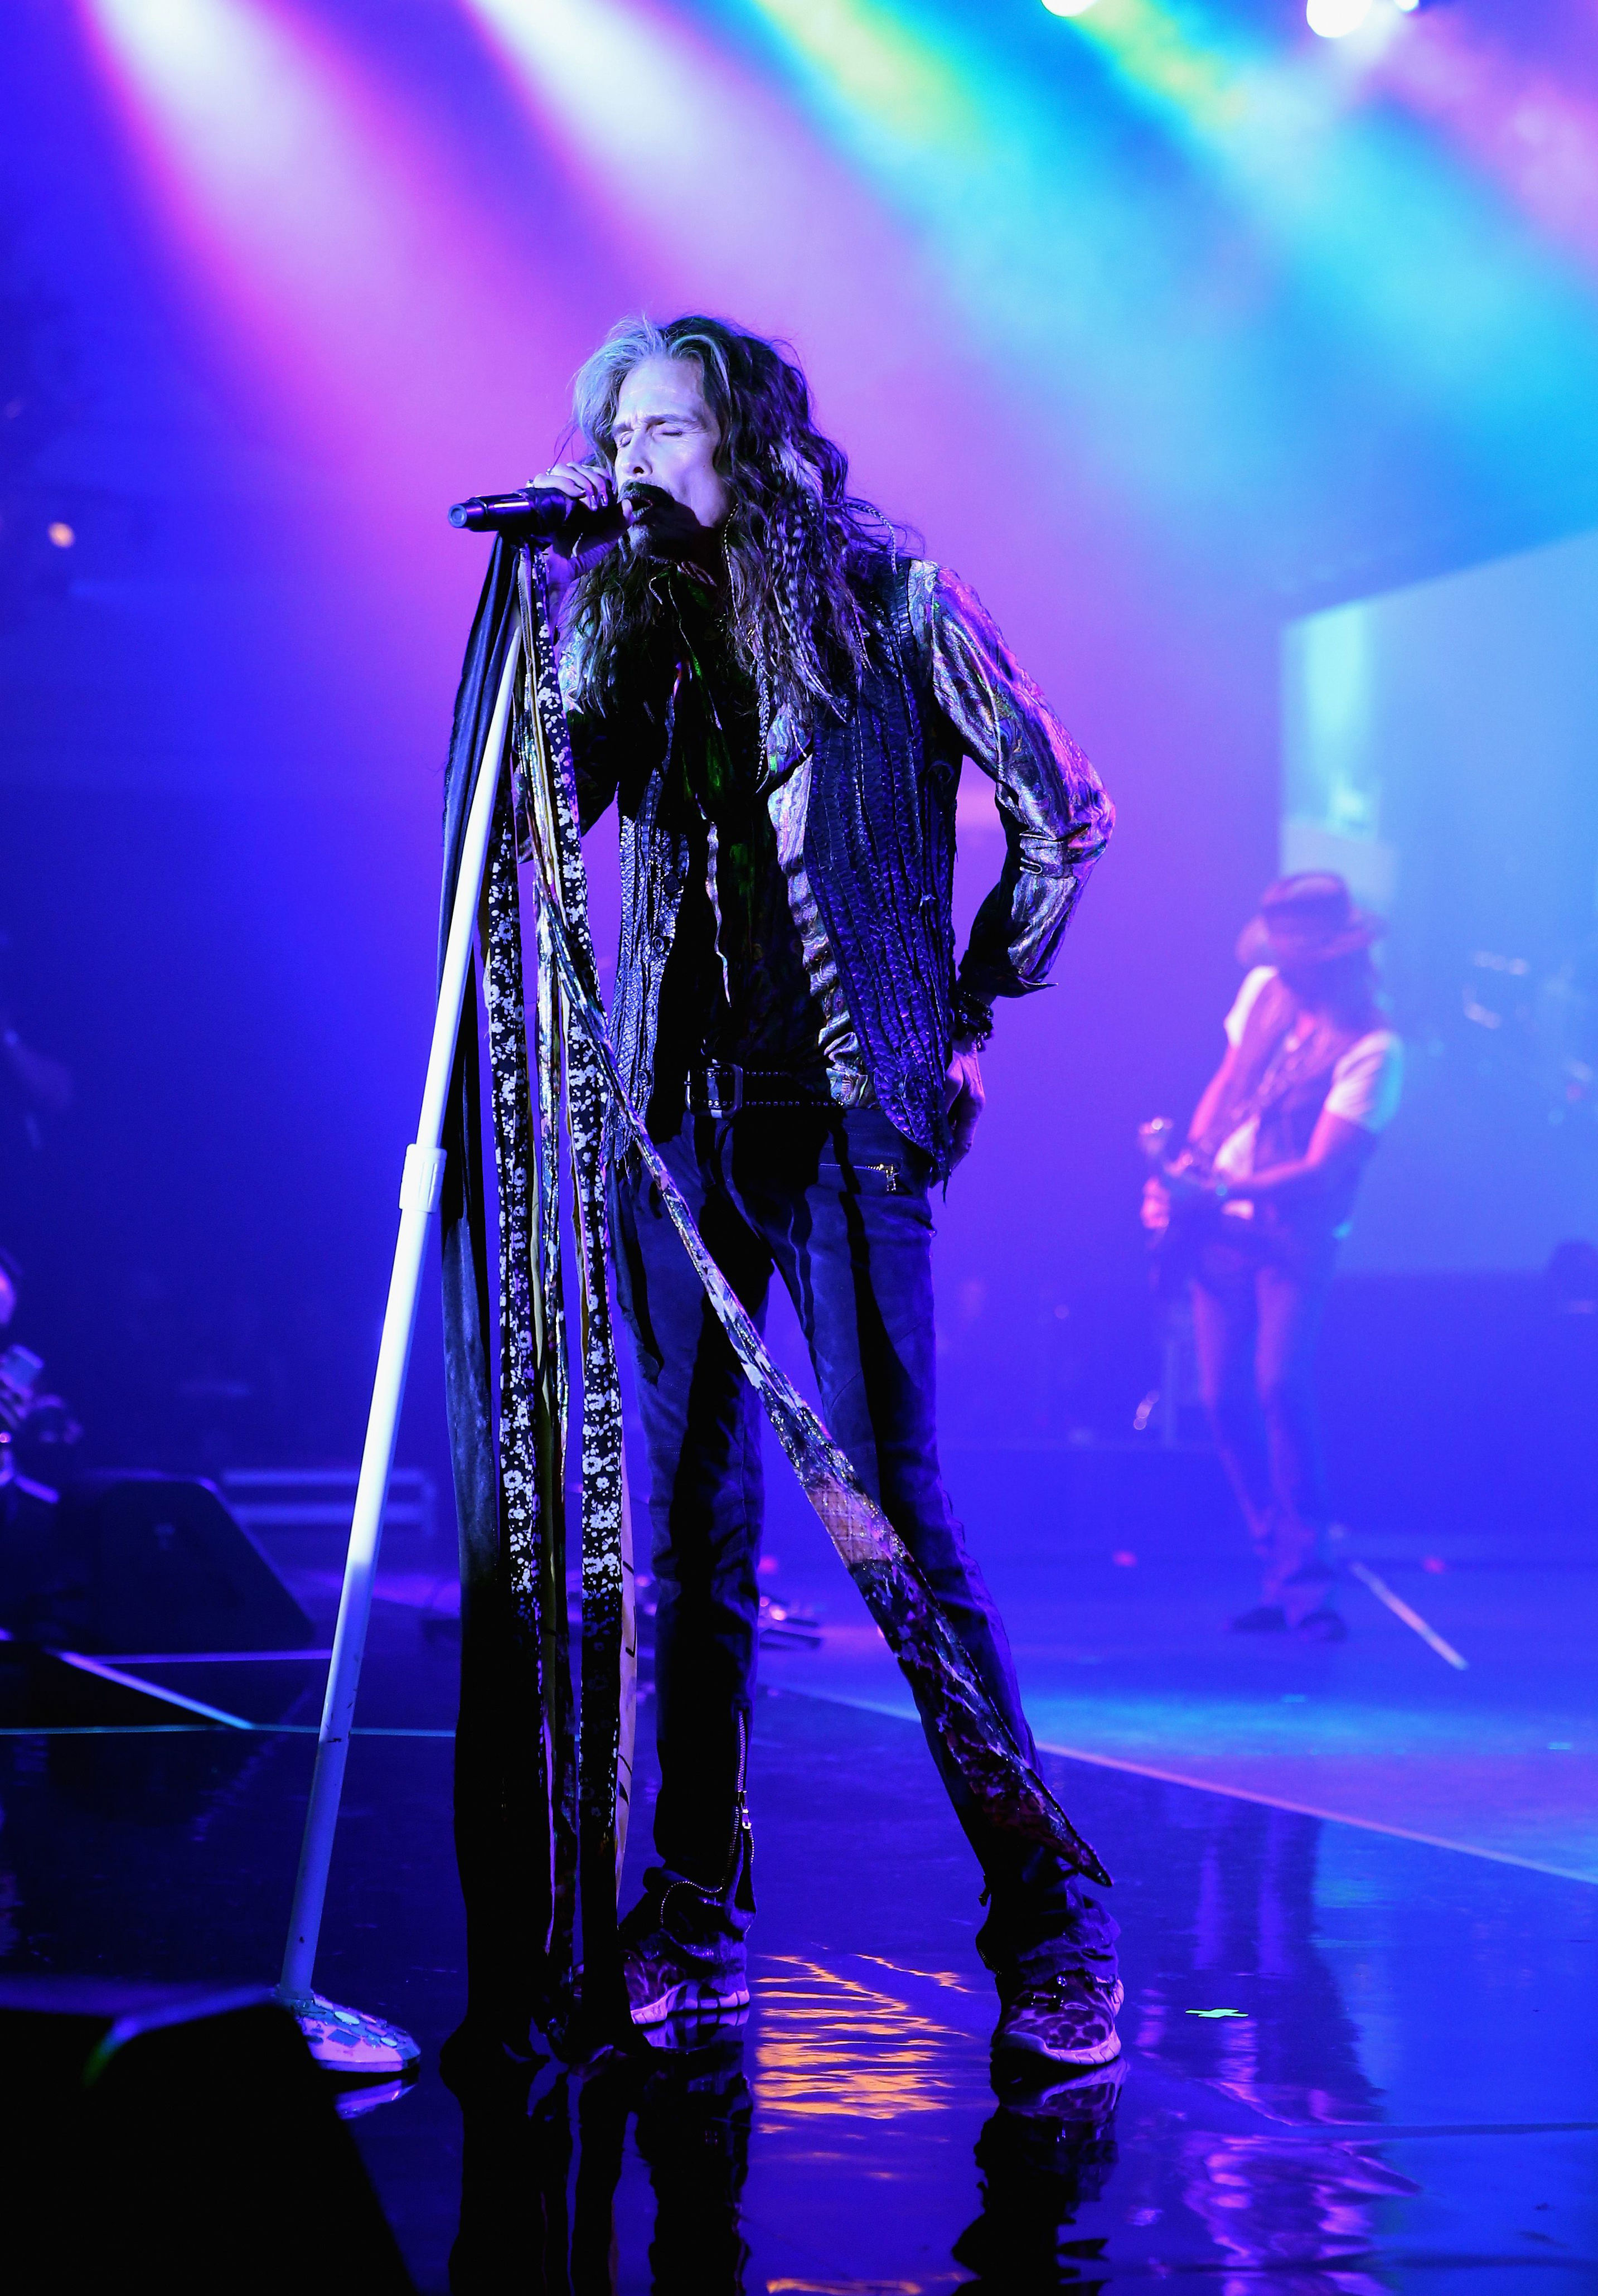 PHOENIX, AZ - MARCH 10: Steven Tyler performs onstage at Celebrity Fight Night XXIV on March 10, 2018 in Phoenix, Arizona. (Photo by Phillip Faraone/Getty Images for Celebrity Fight Night)